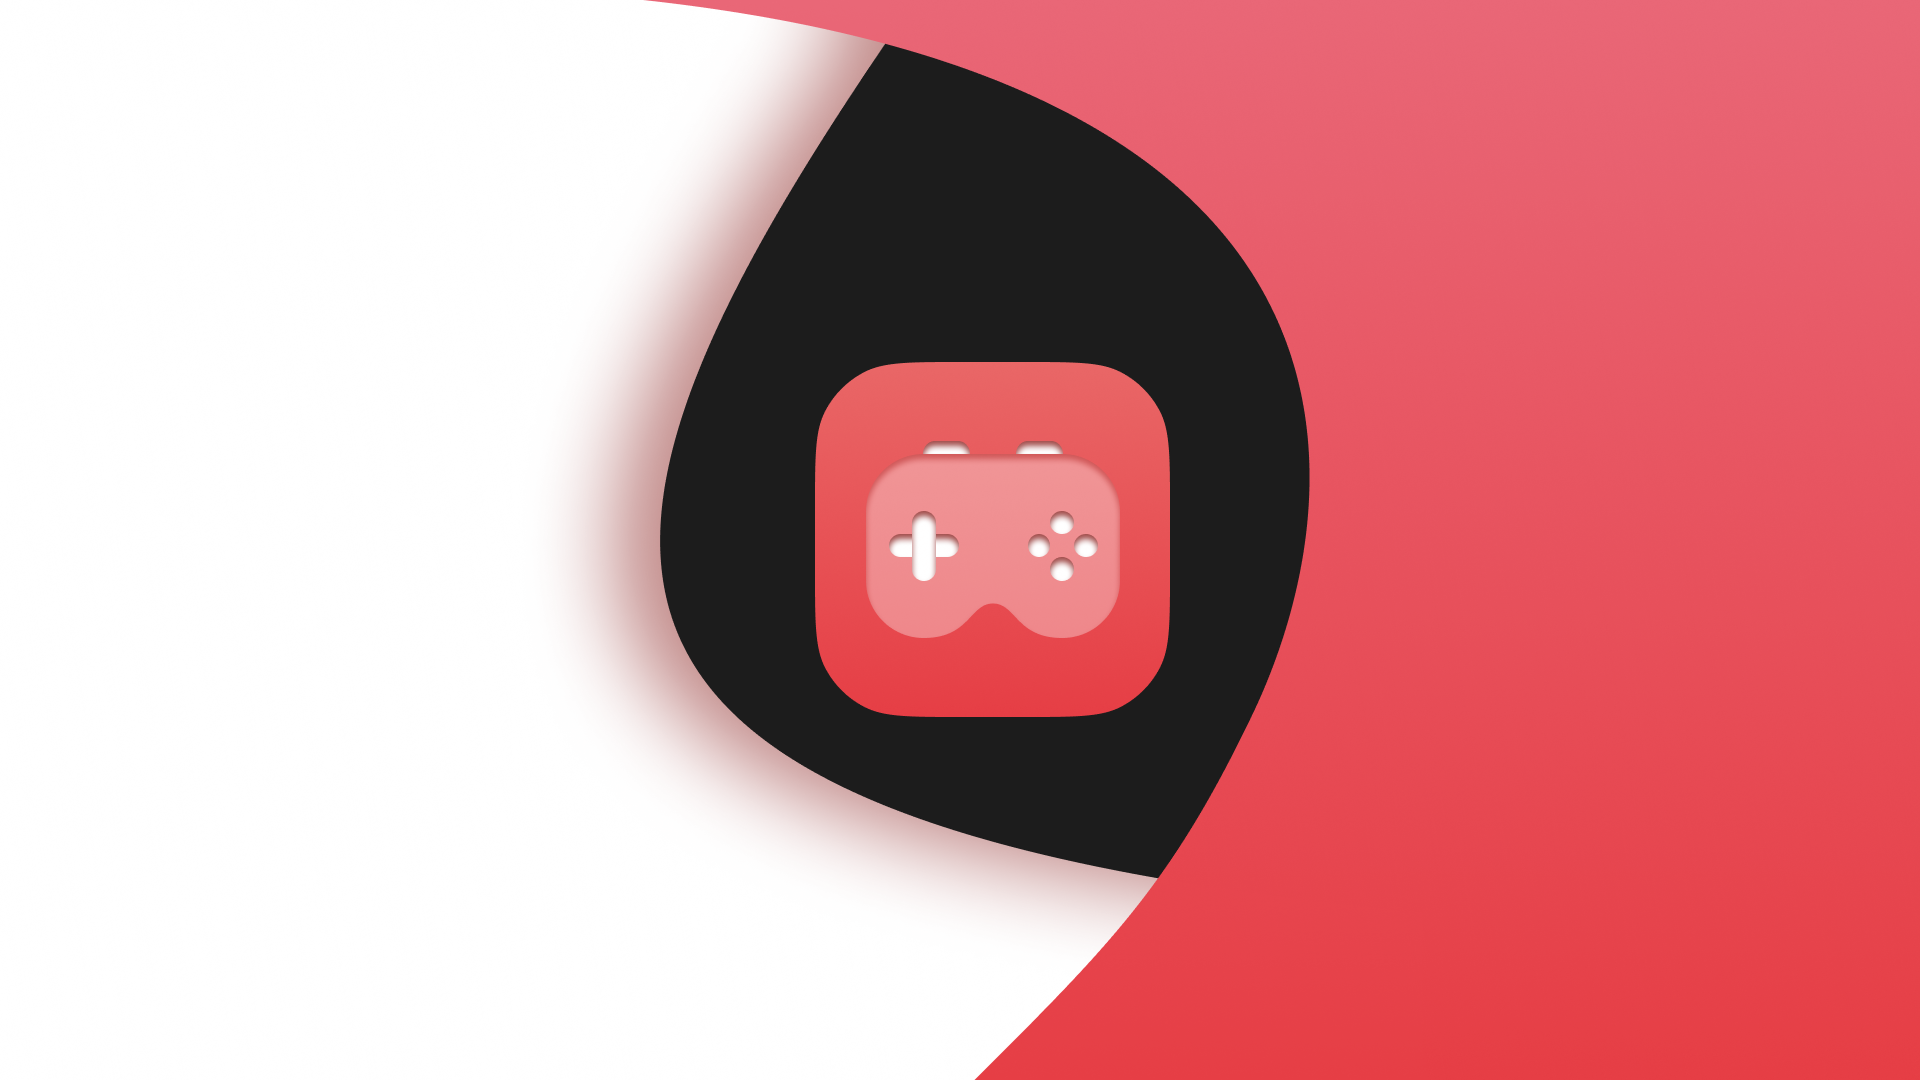 General 1920x1080 controllers red white vector abstract